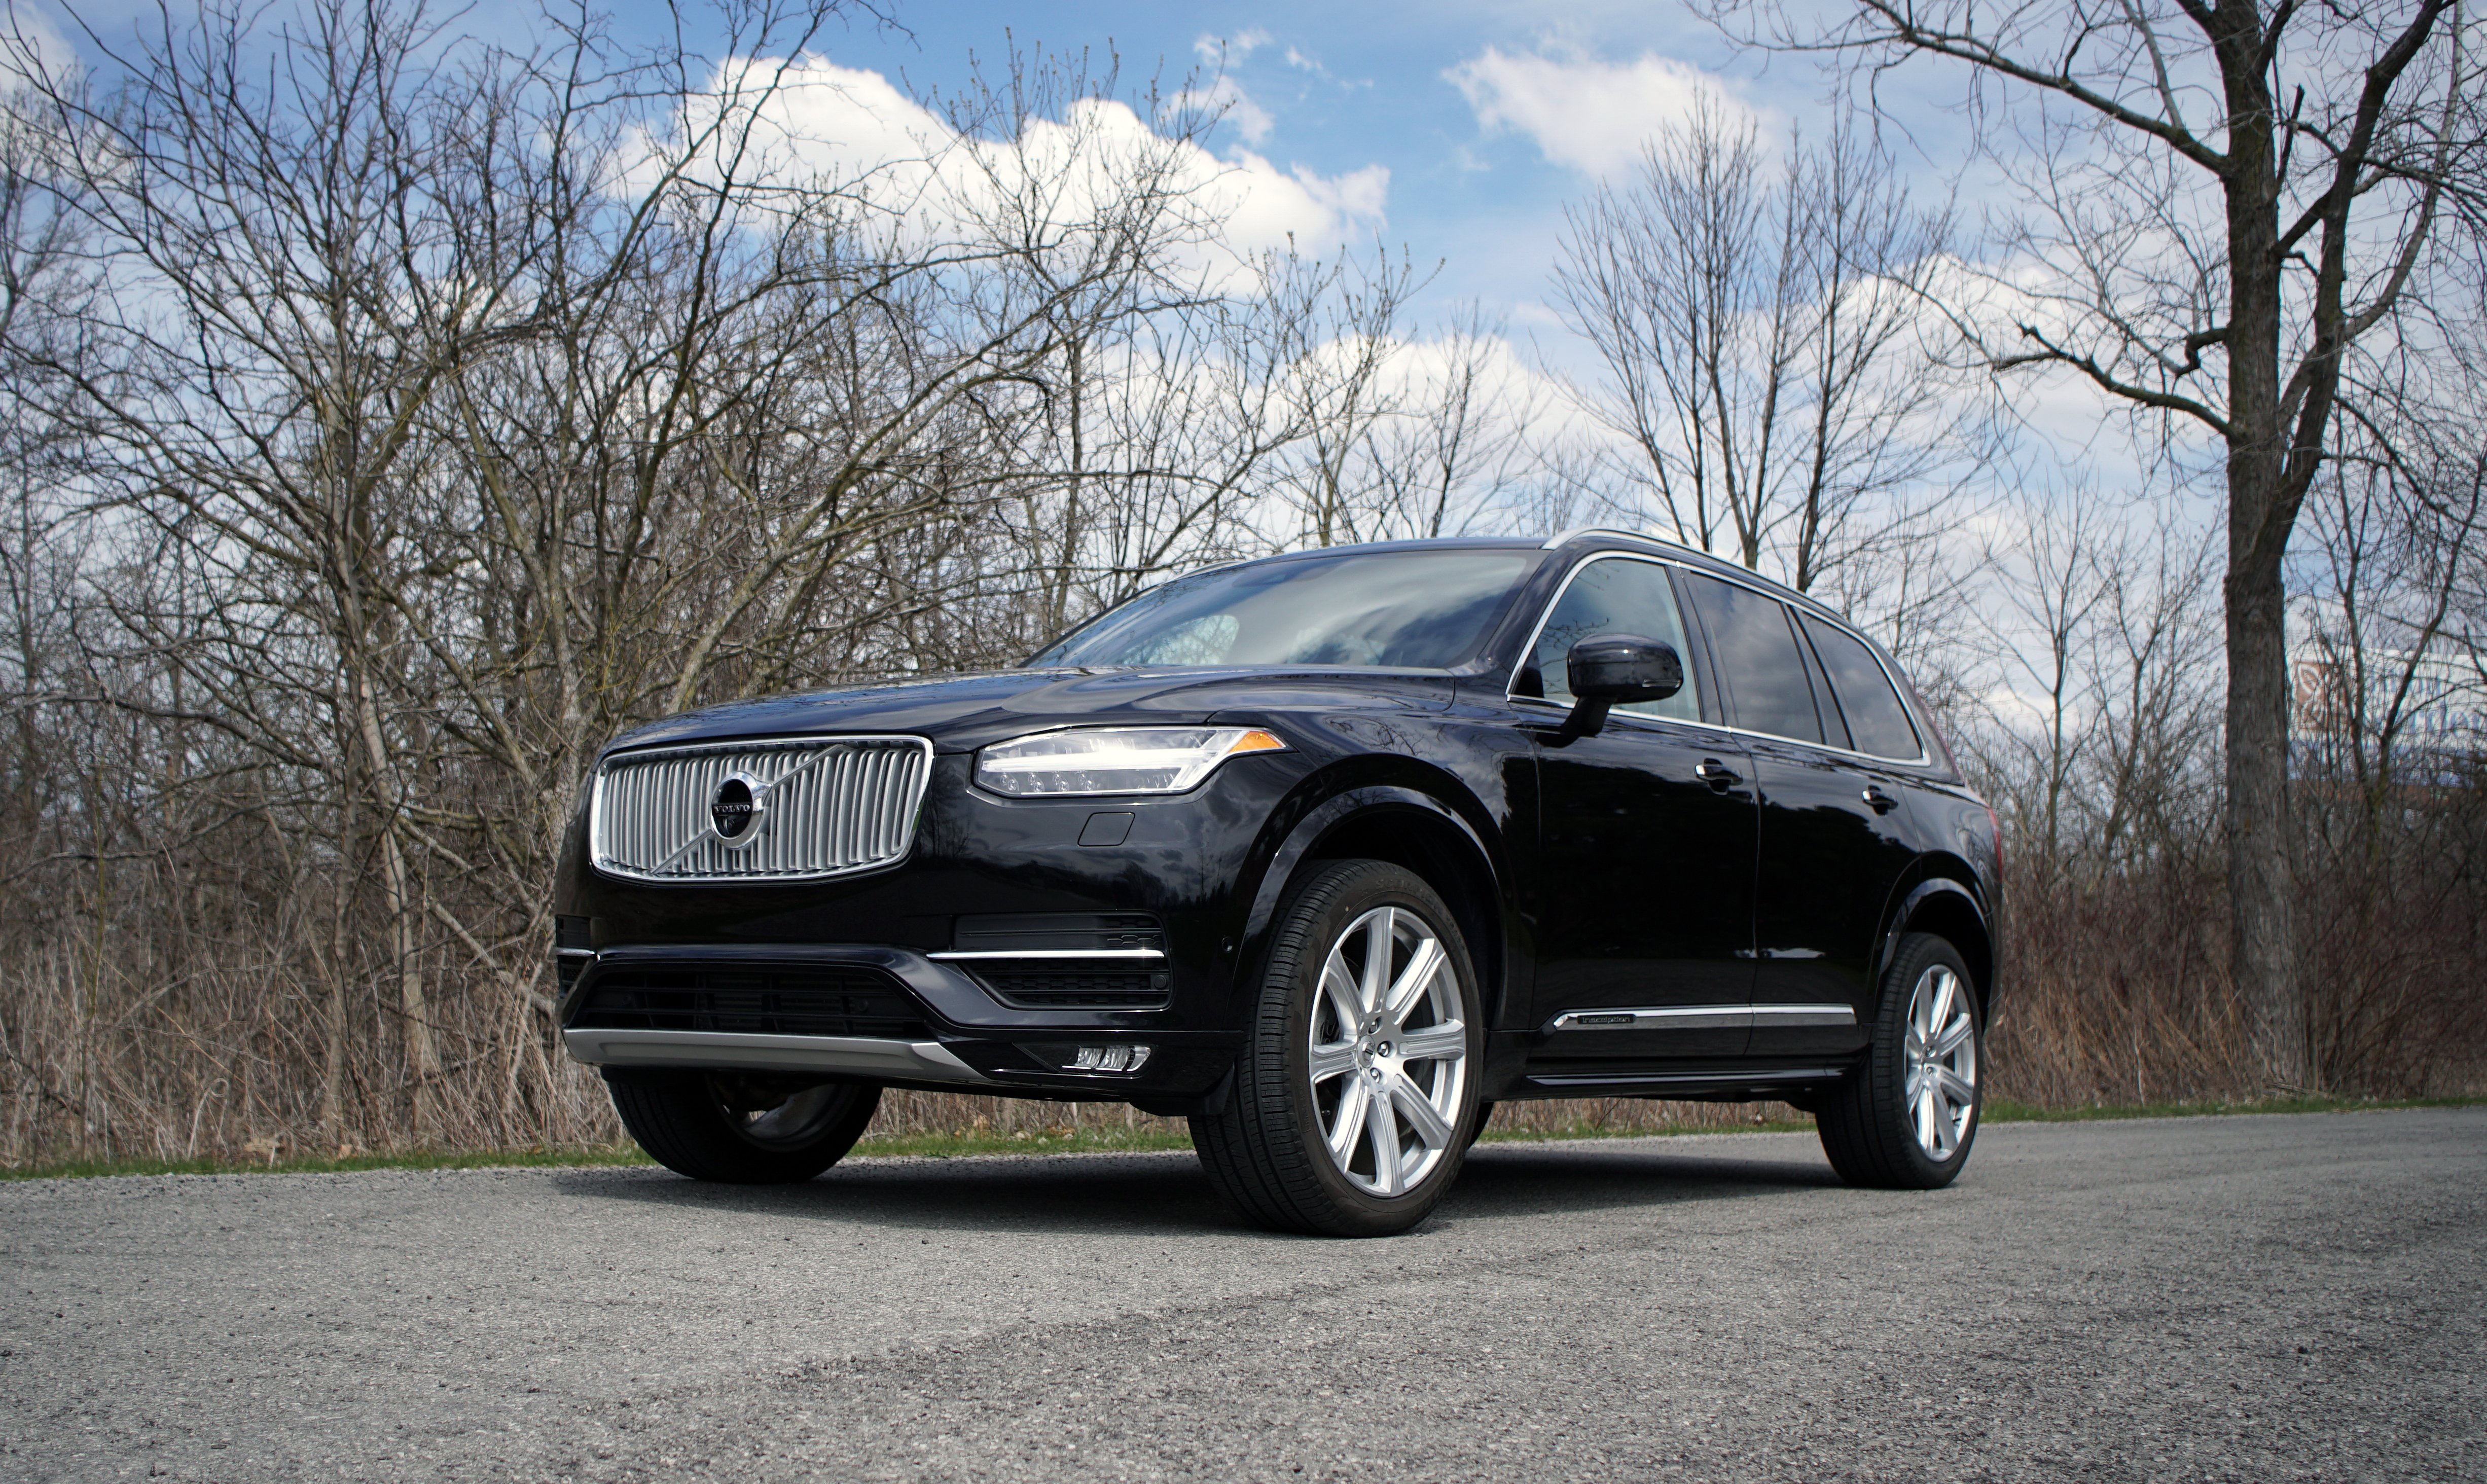 Driving the 2018 Volvo XC90.